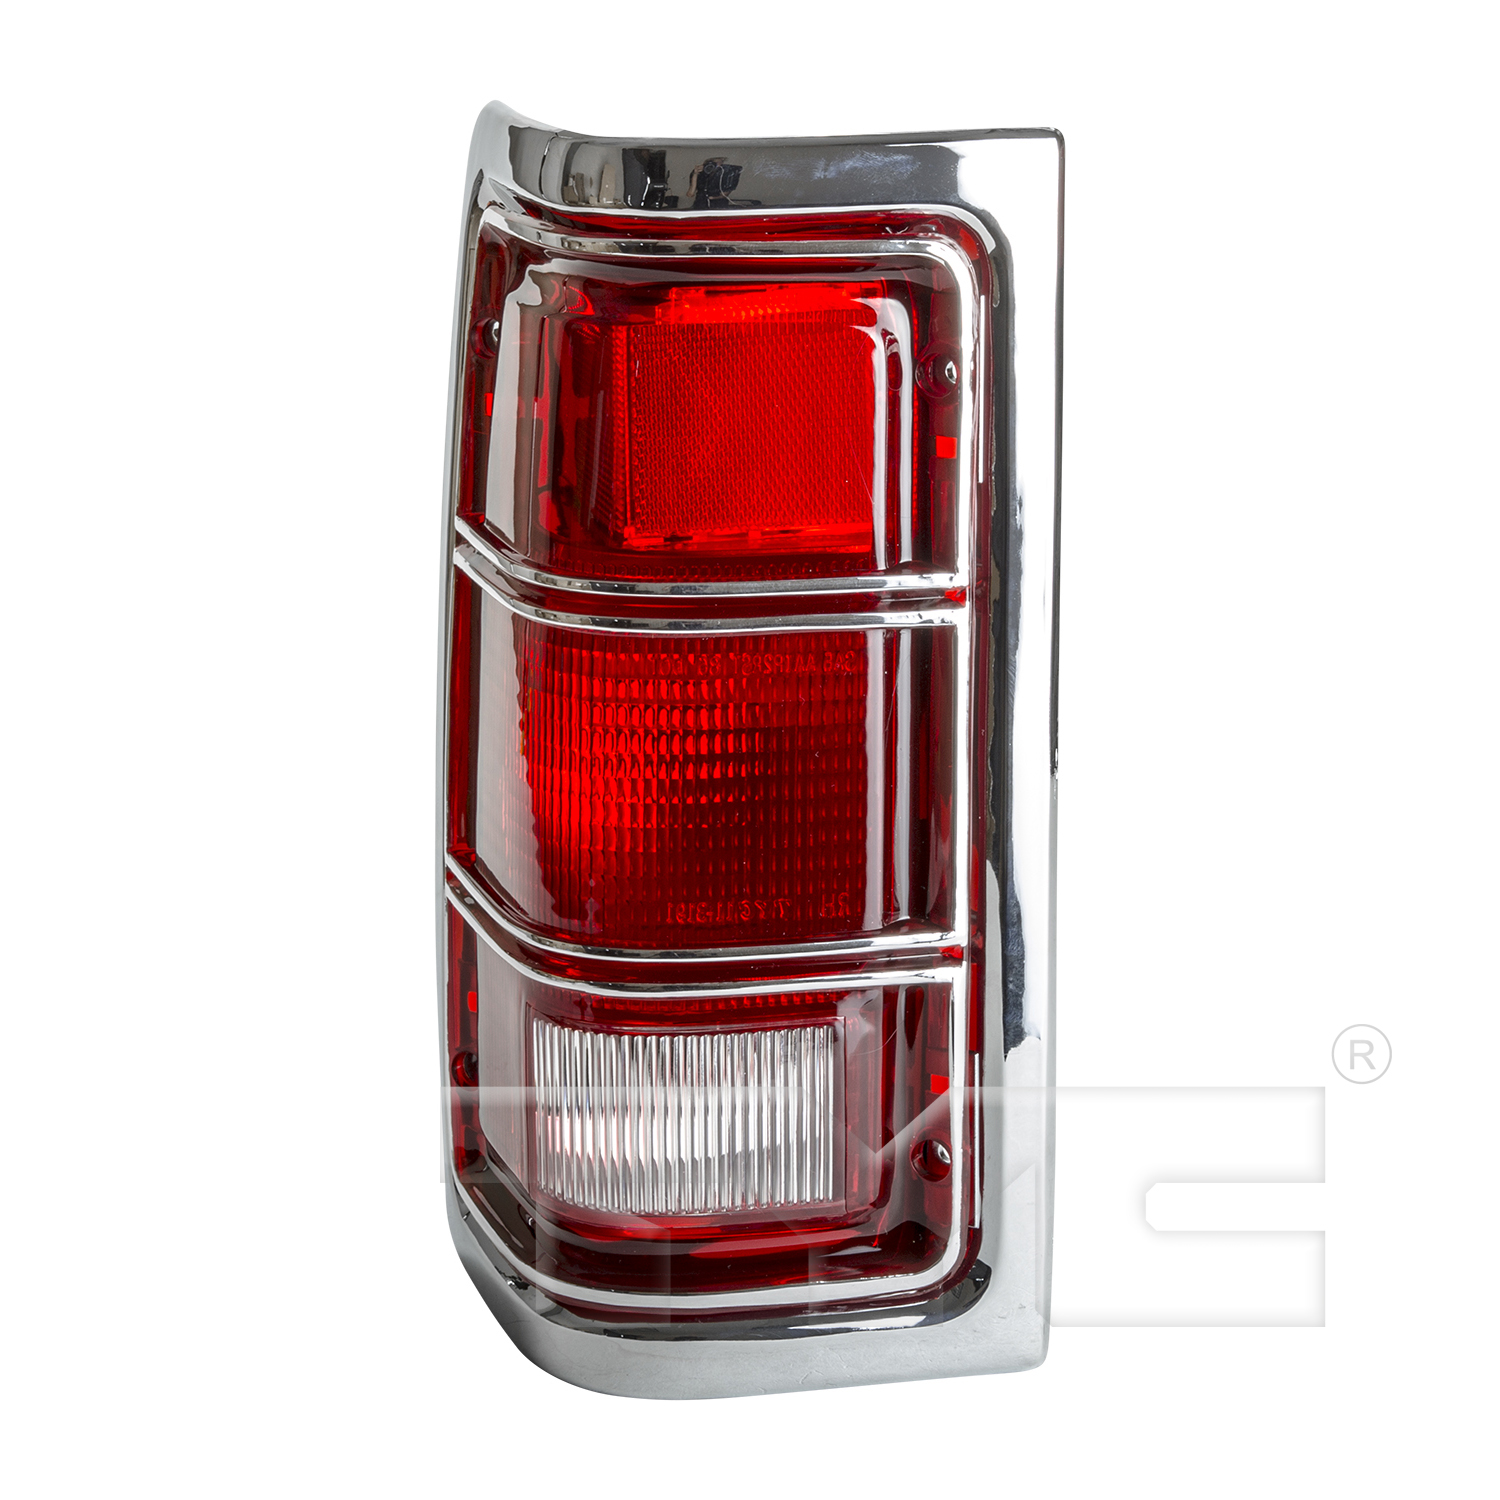 Aftermarket TAILLIGHTS for DODGE - W100, W100,84-87,LT Taillamp lens